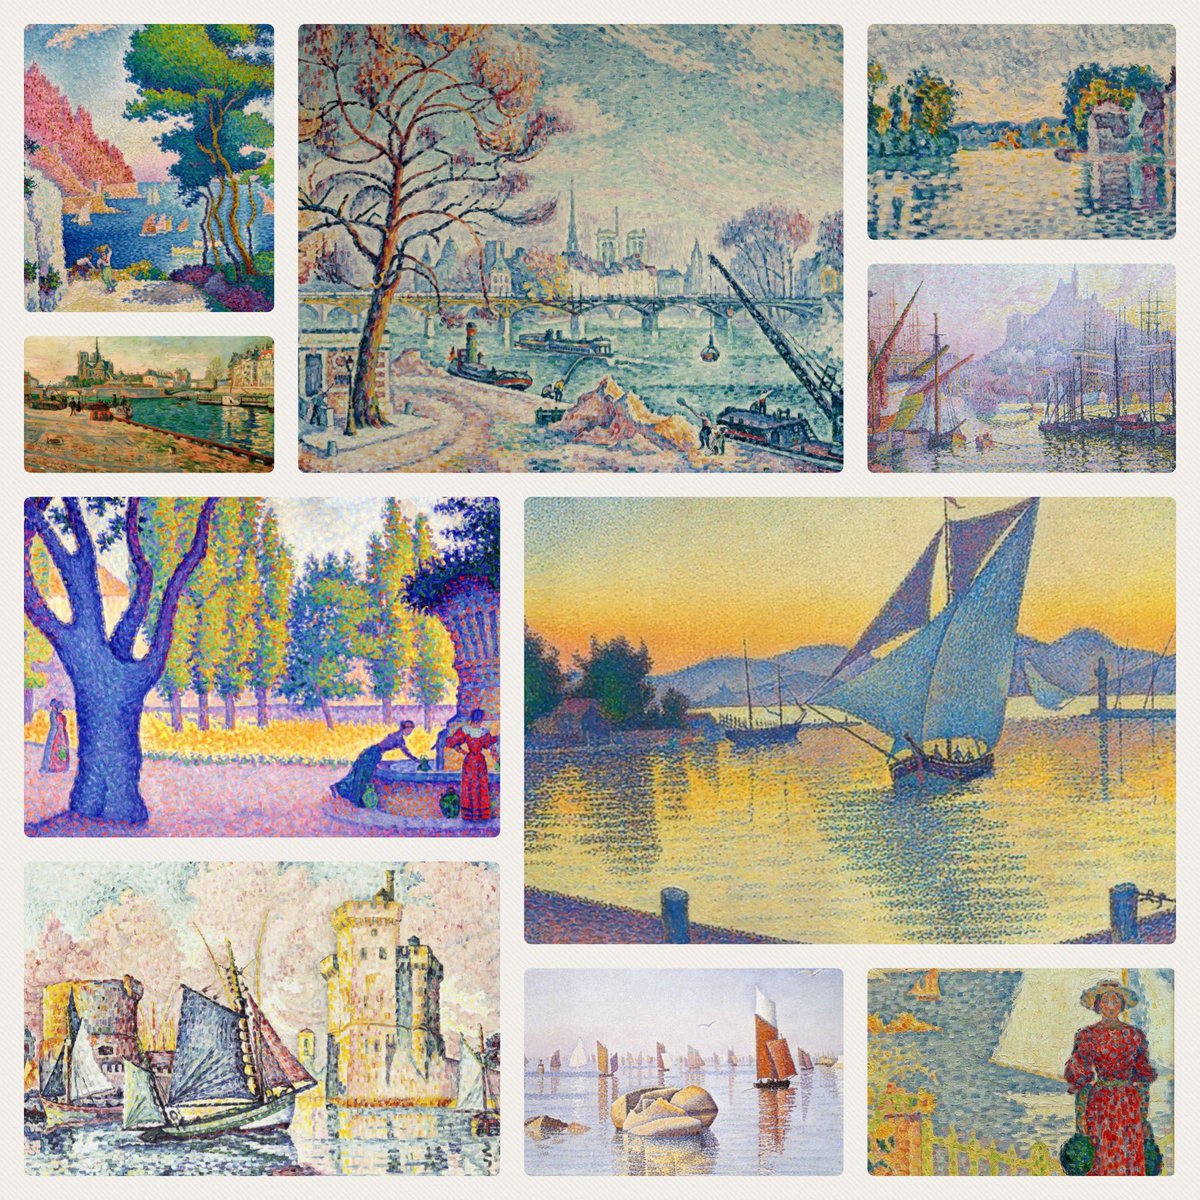 Very taken recently by the paintings of Paul Signac (1863-1935). Here is a selection of those I’ve posted in the last couple of weeks.